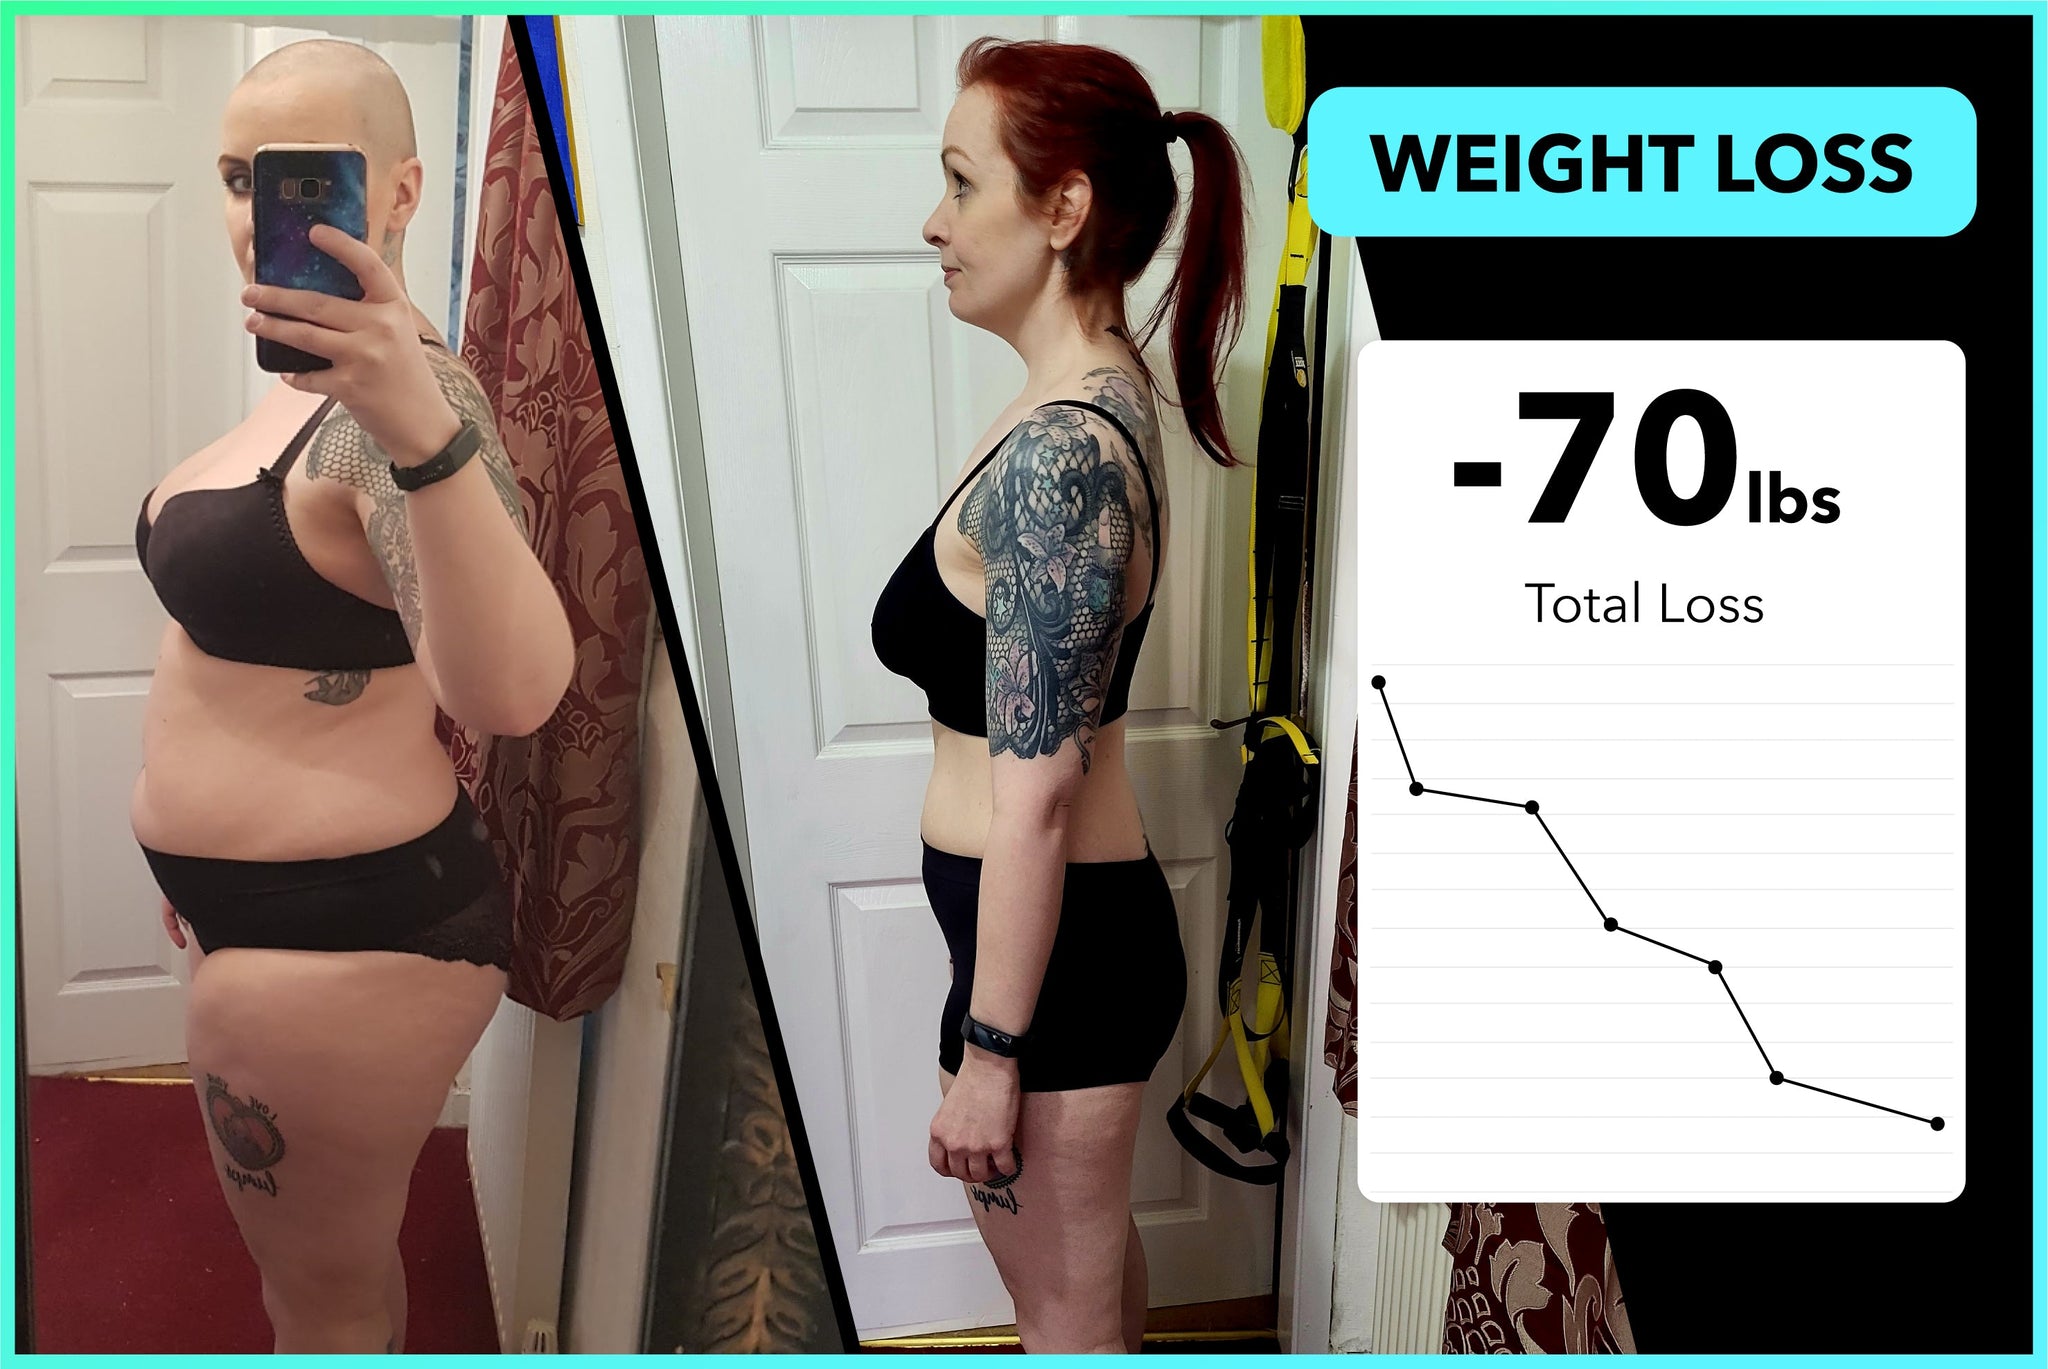 Find out how Lisa lost 70lbs with Team RH